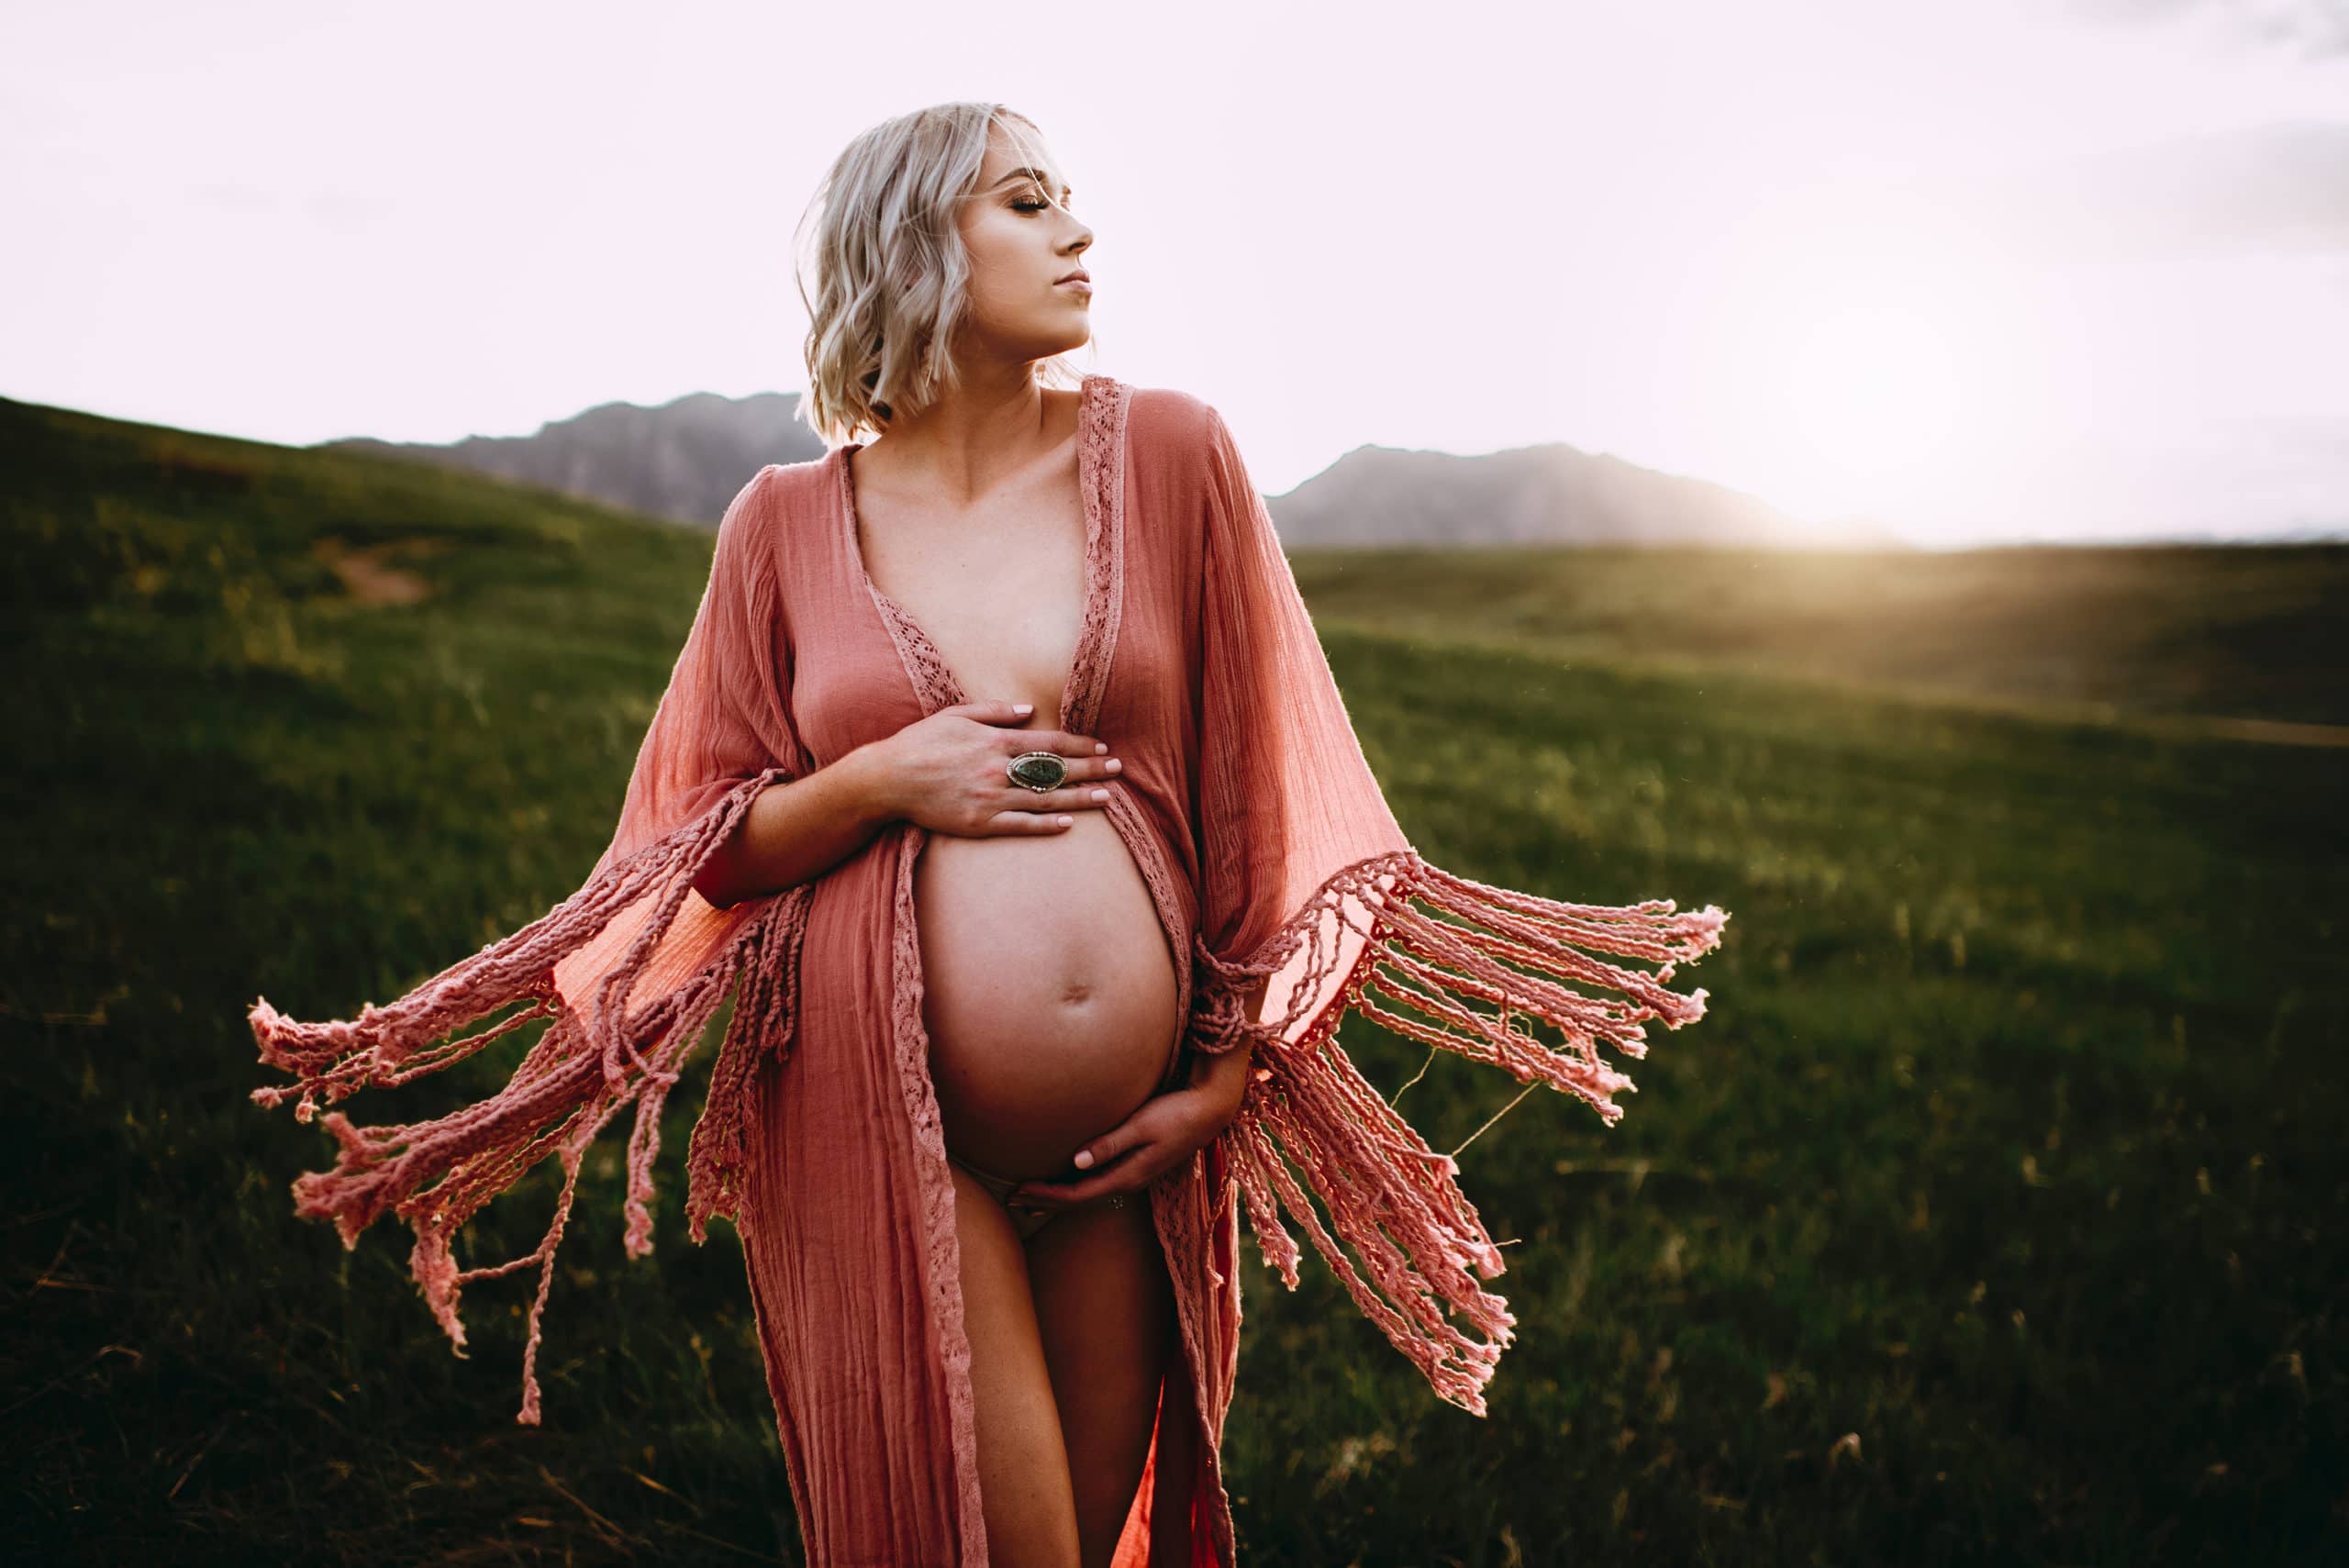 Maternity Photographer, a pregnant woman walks confidently in grassy field